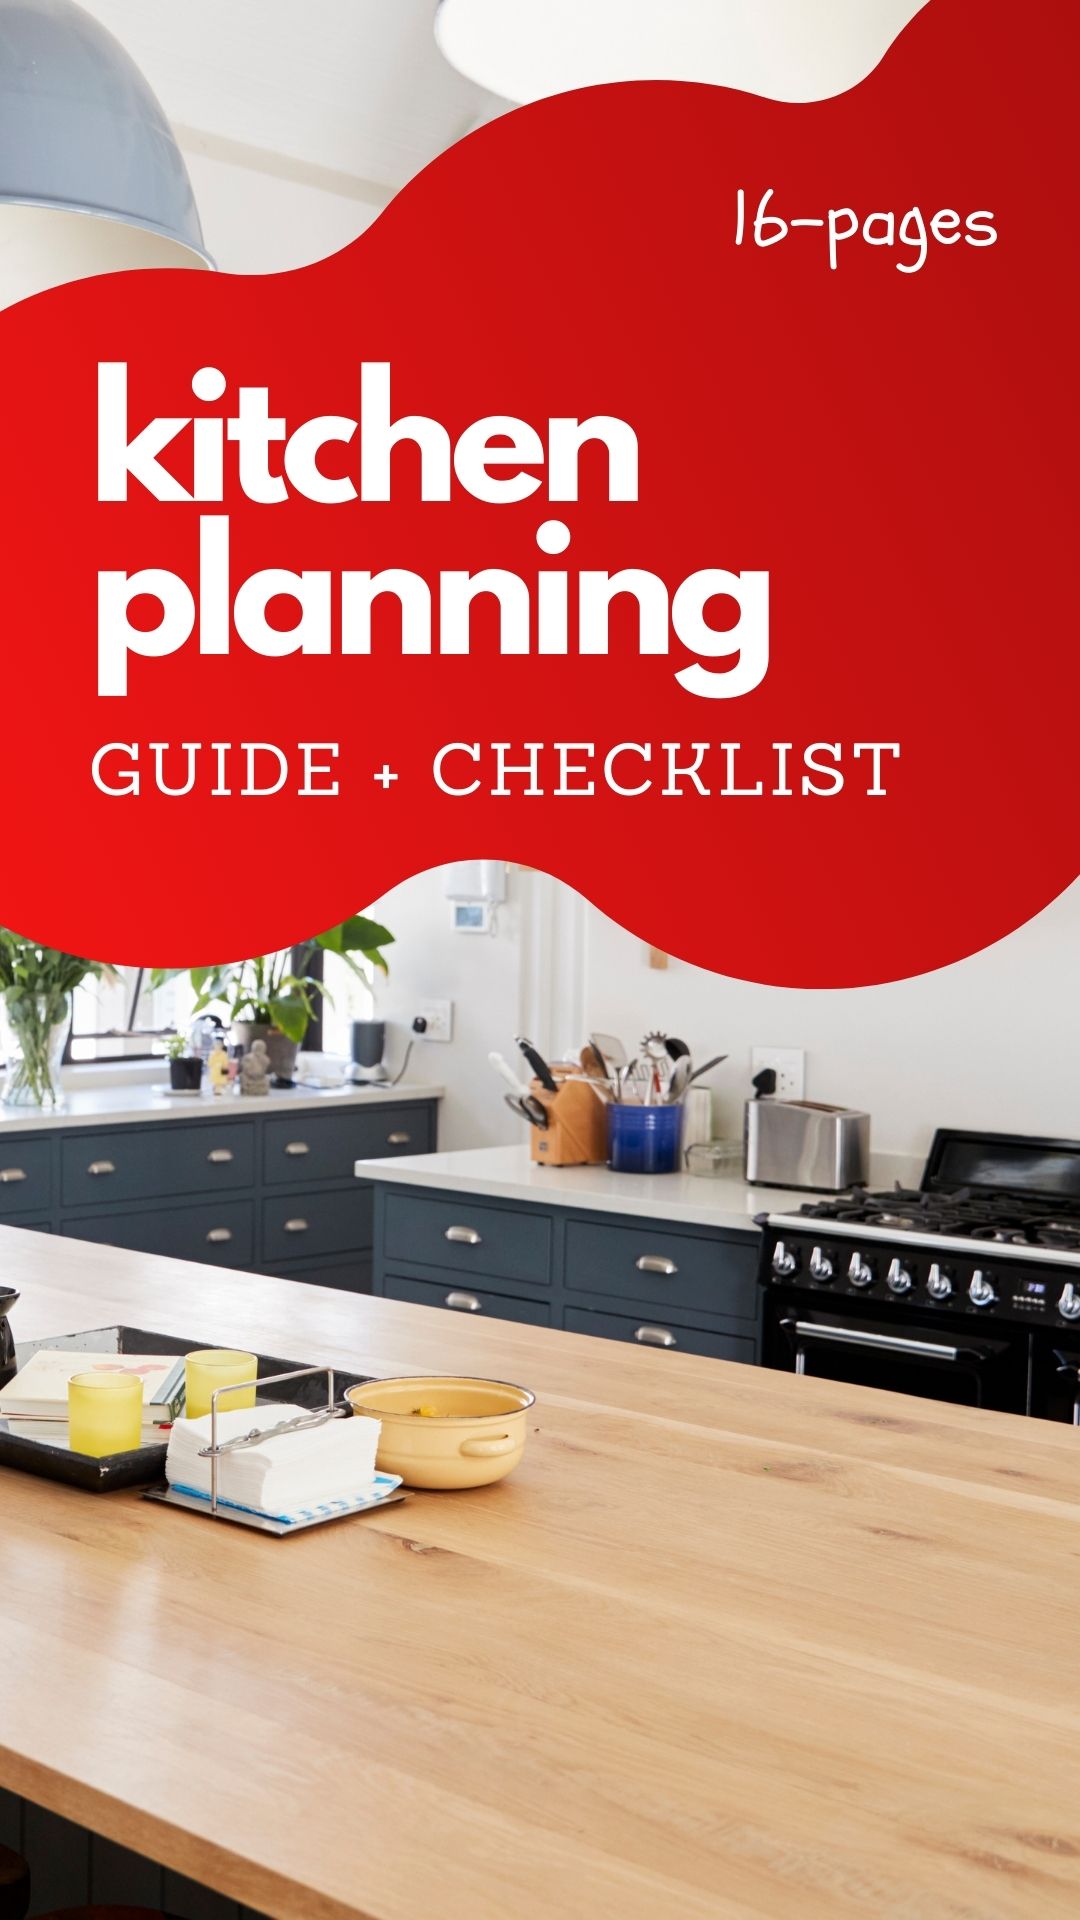 Request a Kitchen Planning Guide